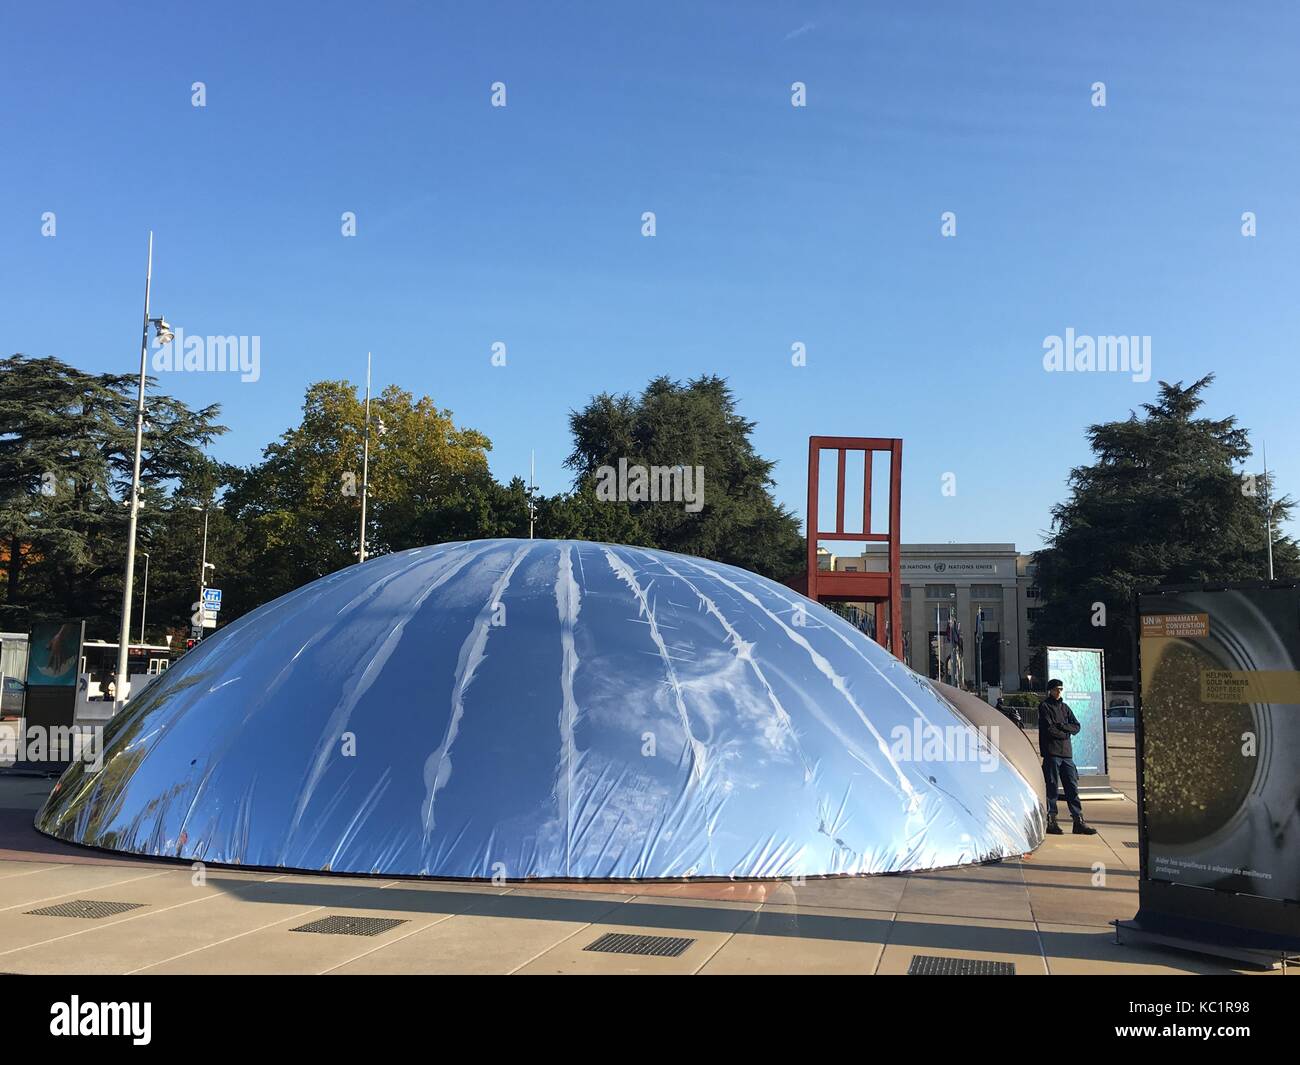 A tent in the shape of a large drop of mercury standing in front of the  Palace of the League of Nations in Geneva, Switzerland, 28 Septmeber 2017.  The tent serves the